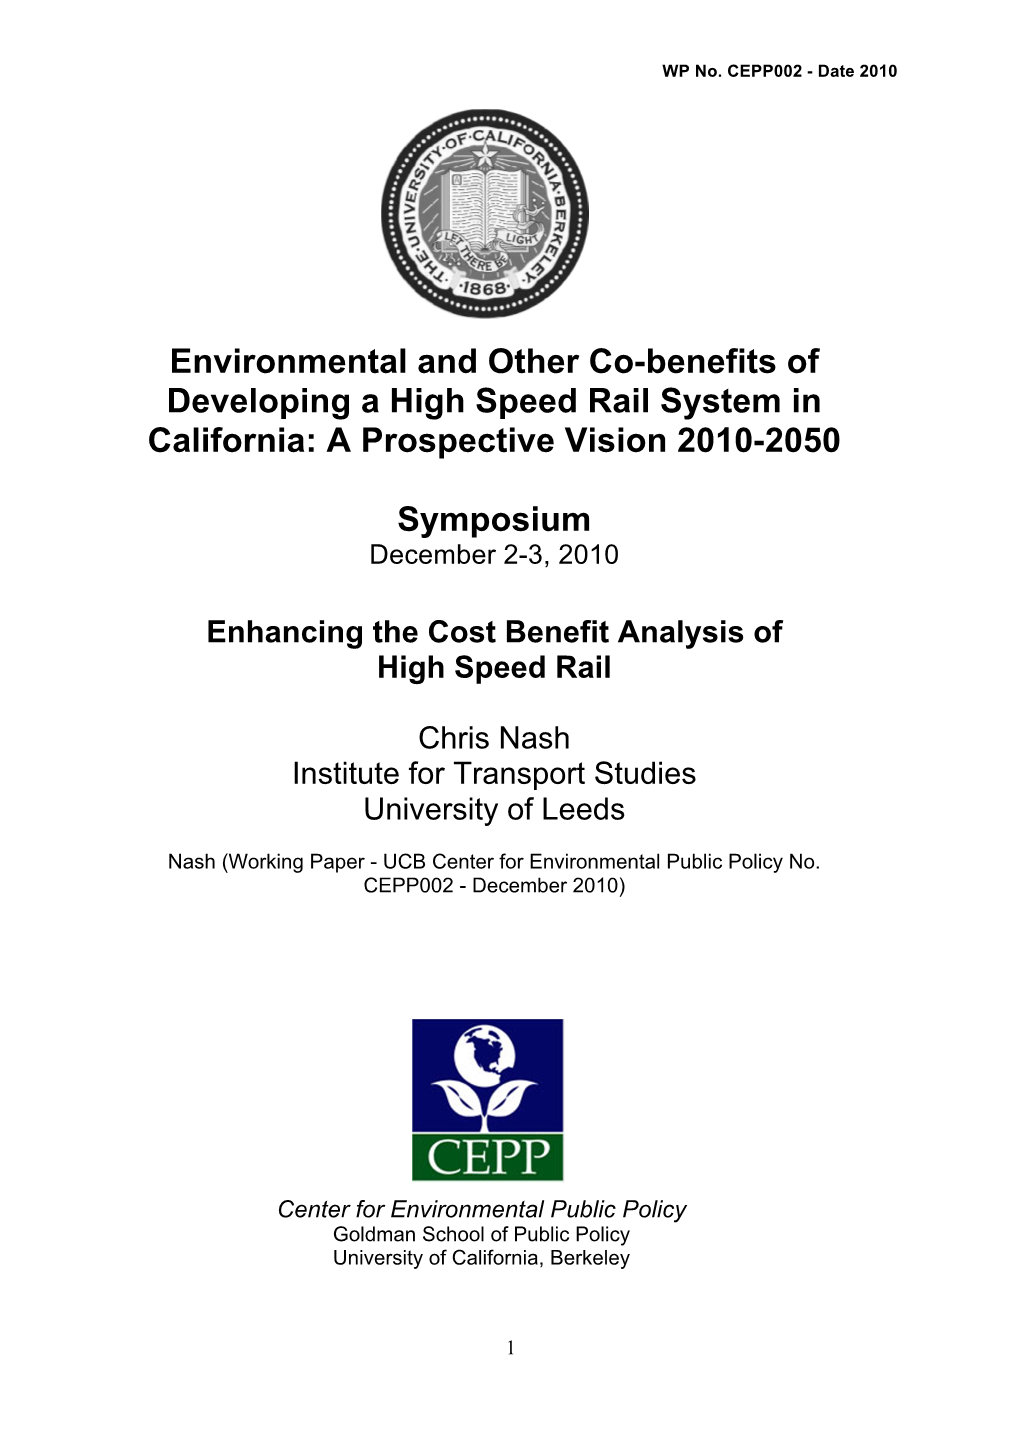 Environmental and Other Co-Benefits of Developing a High Speed Rail System in California: a Prospective Vision 2010-2050